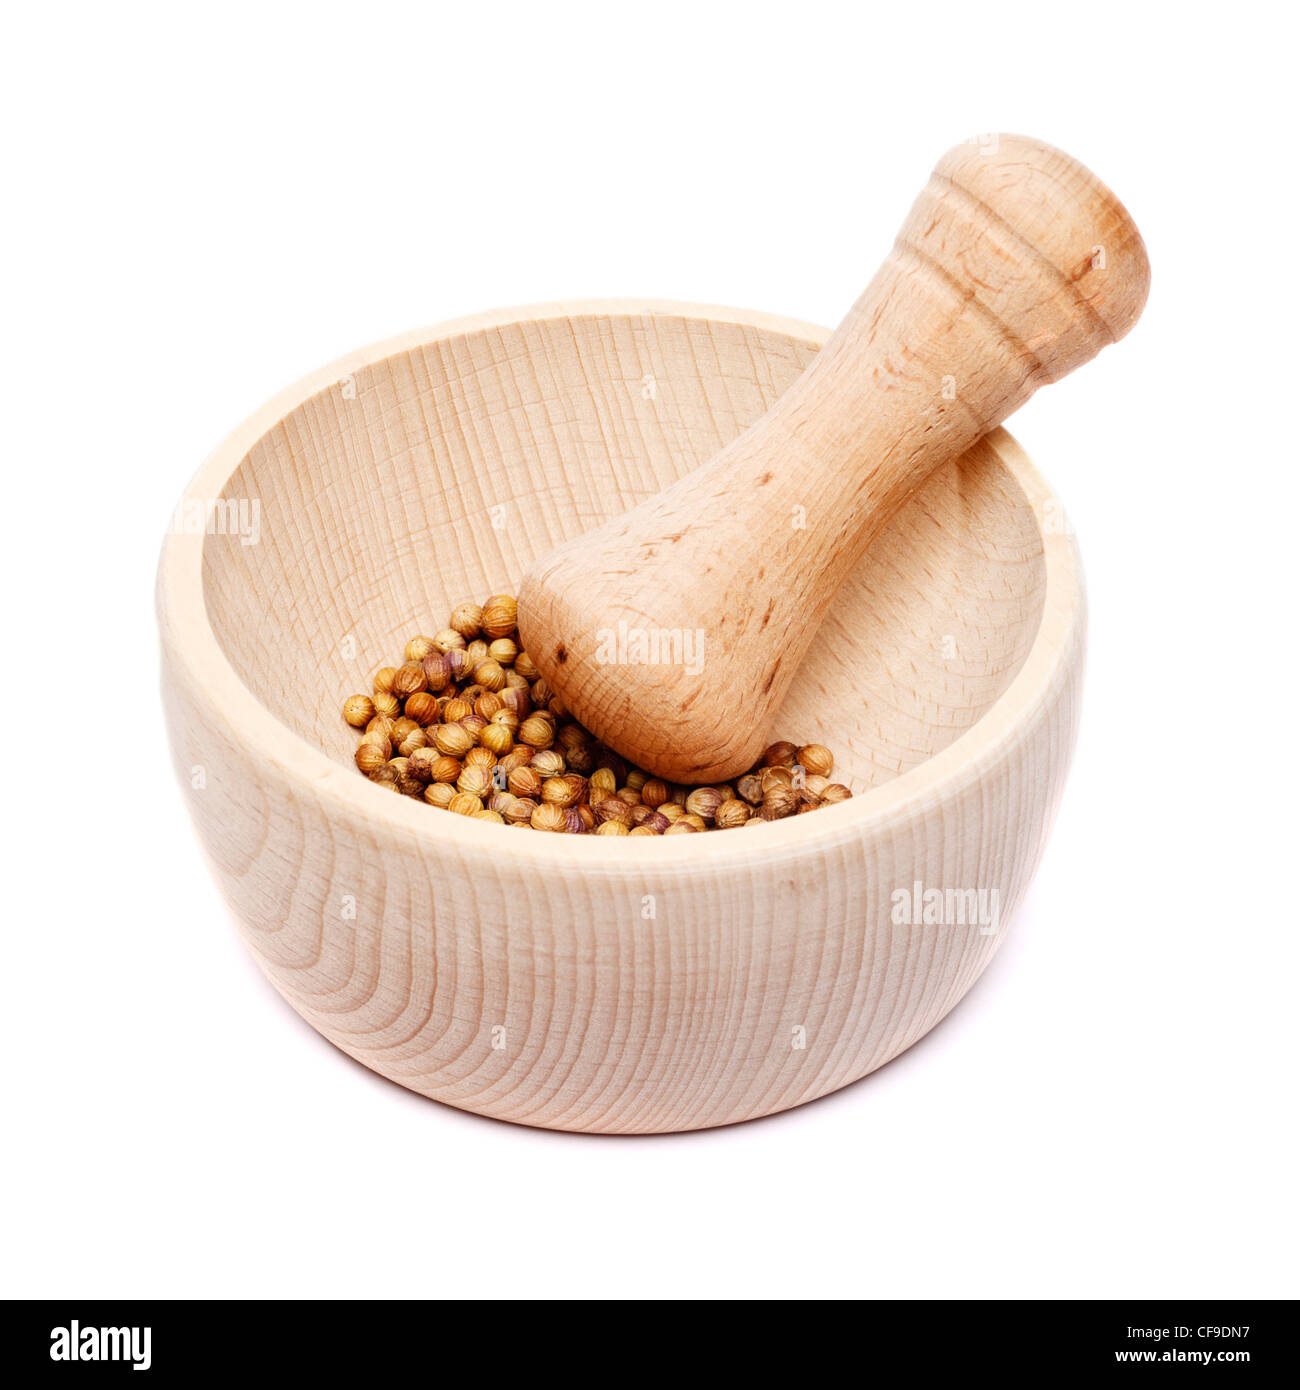 Pestle and mortar with coriander seeds Stock Photo